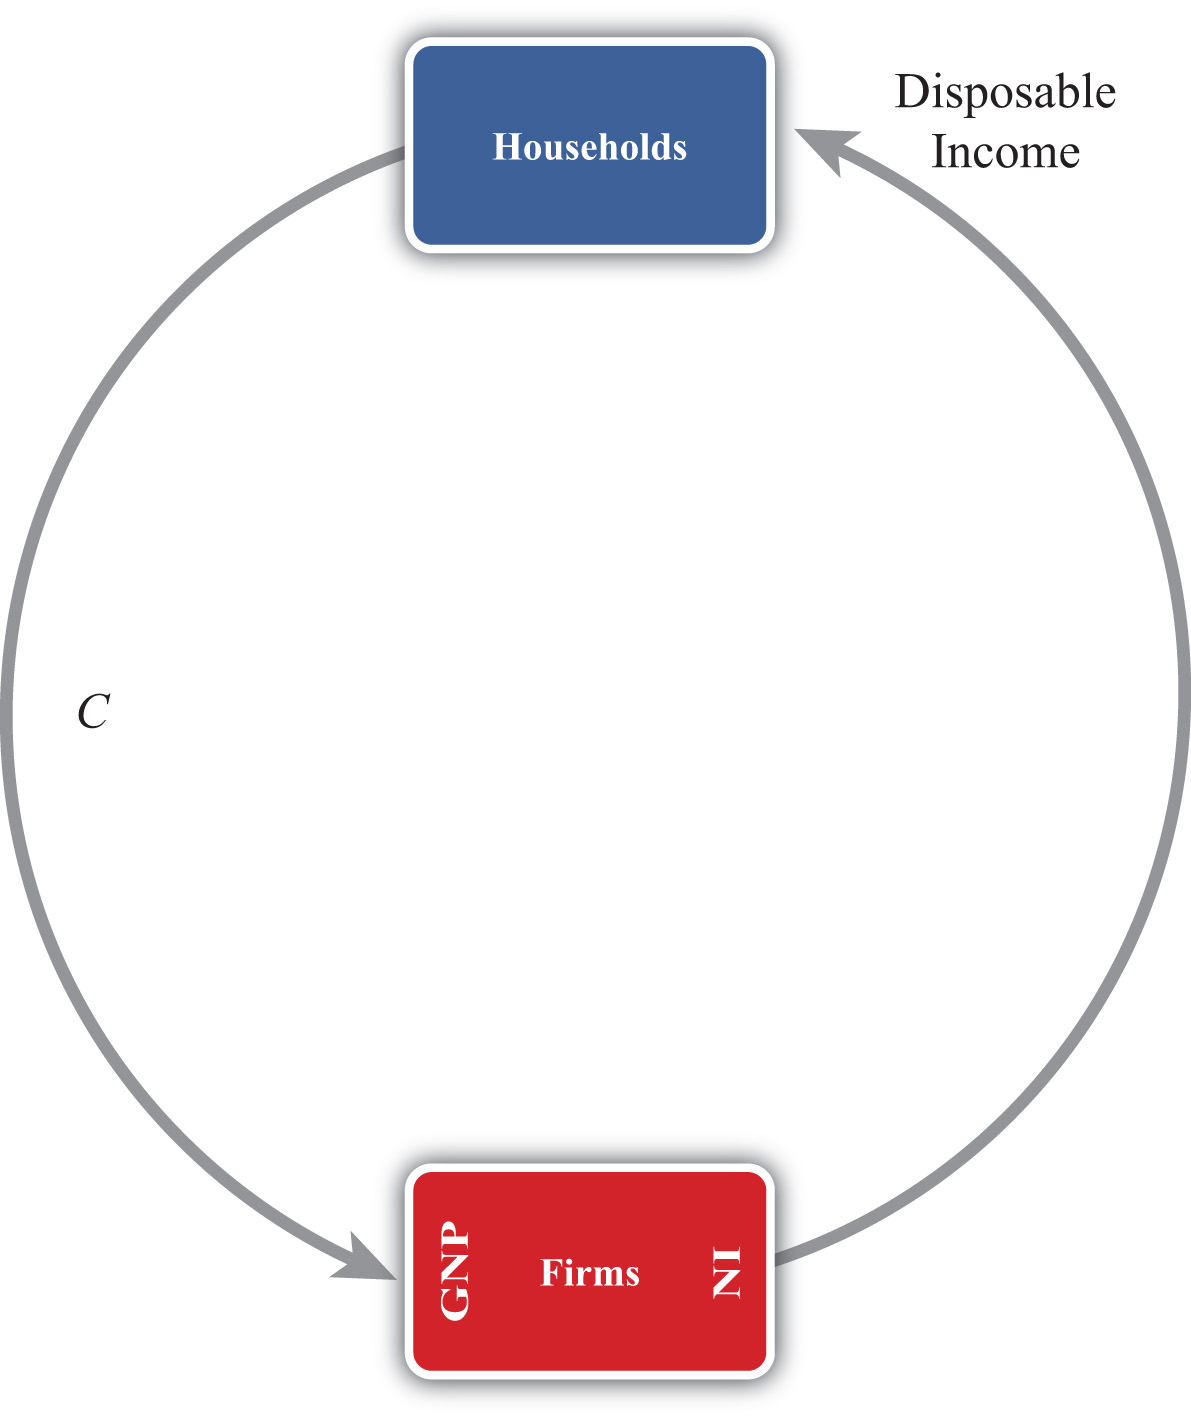 1. the circular fl ow model is a simplifi ed version of our economy. describe how this model works